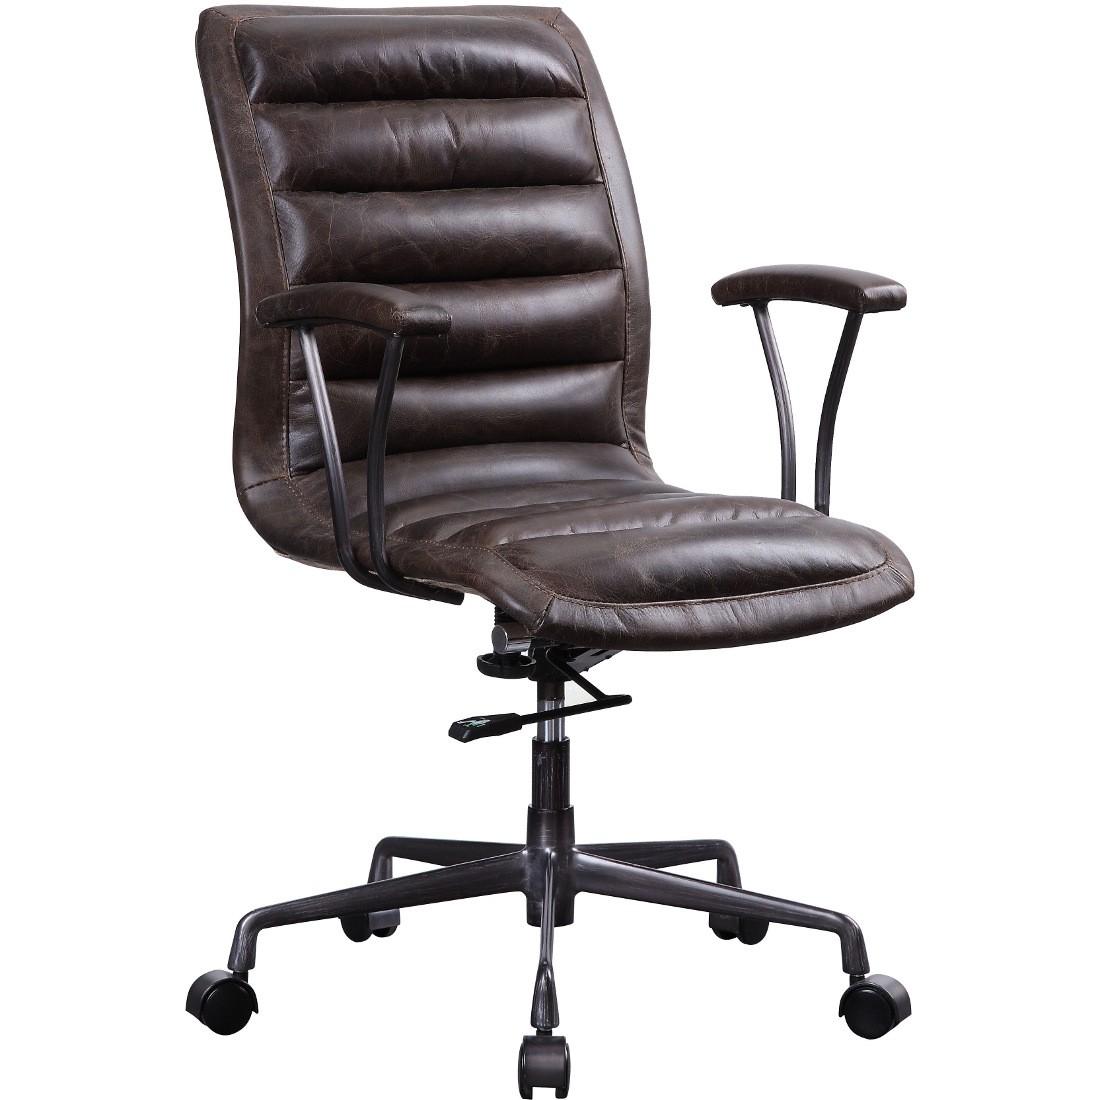 Contemporary, Transitional Executive Chair Zooey Zooey 92558 in Metal, Chocolate Top grain leather